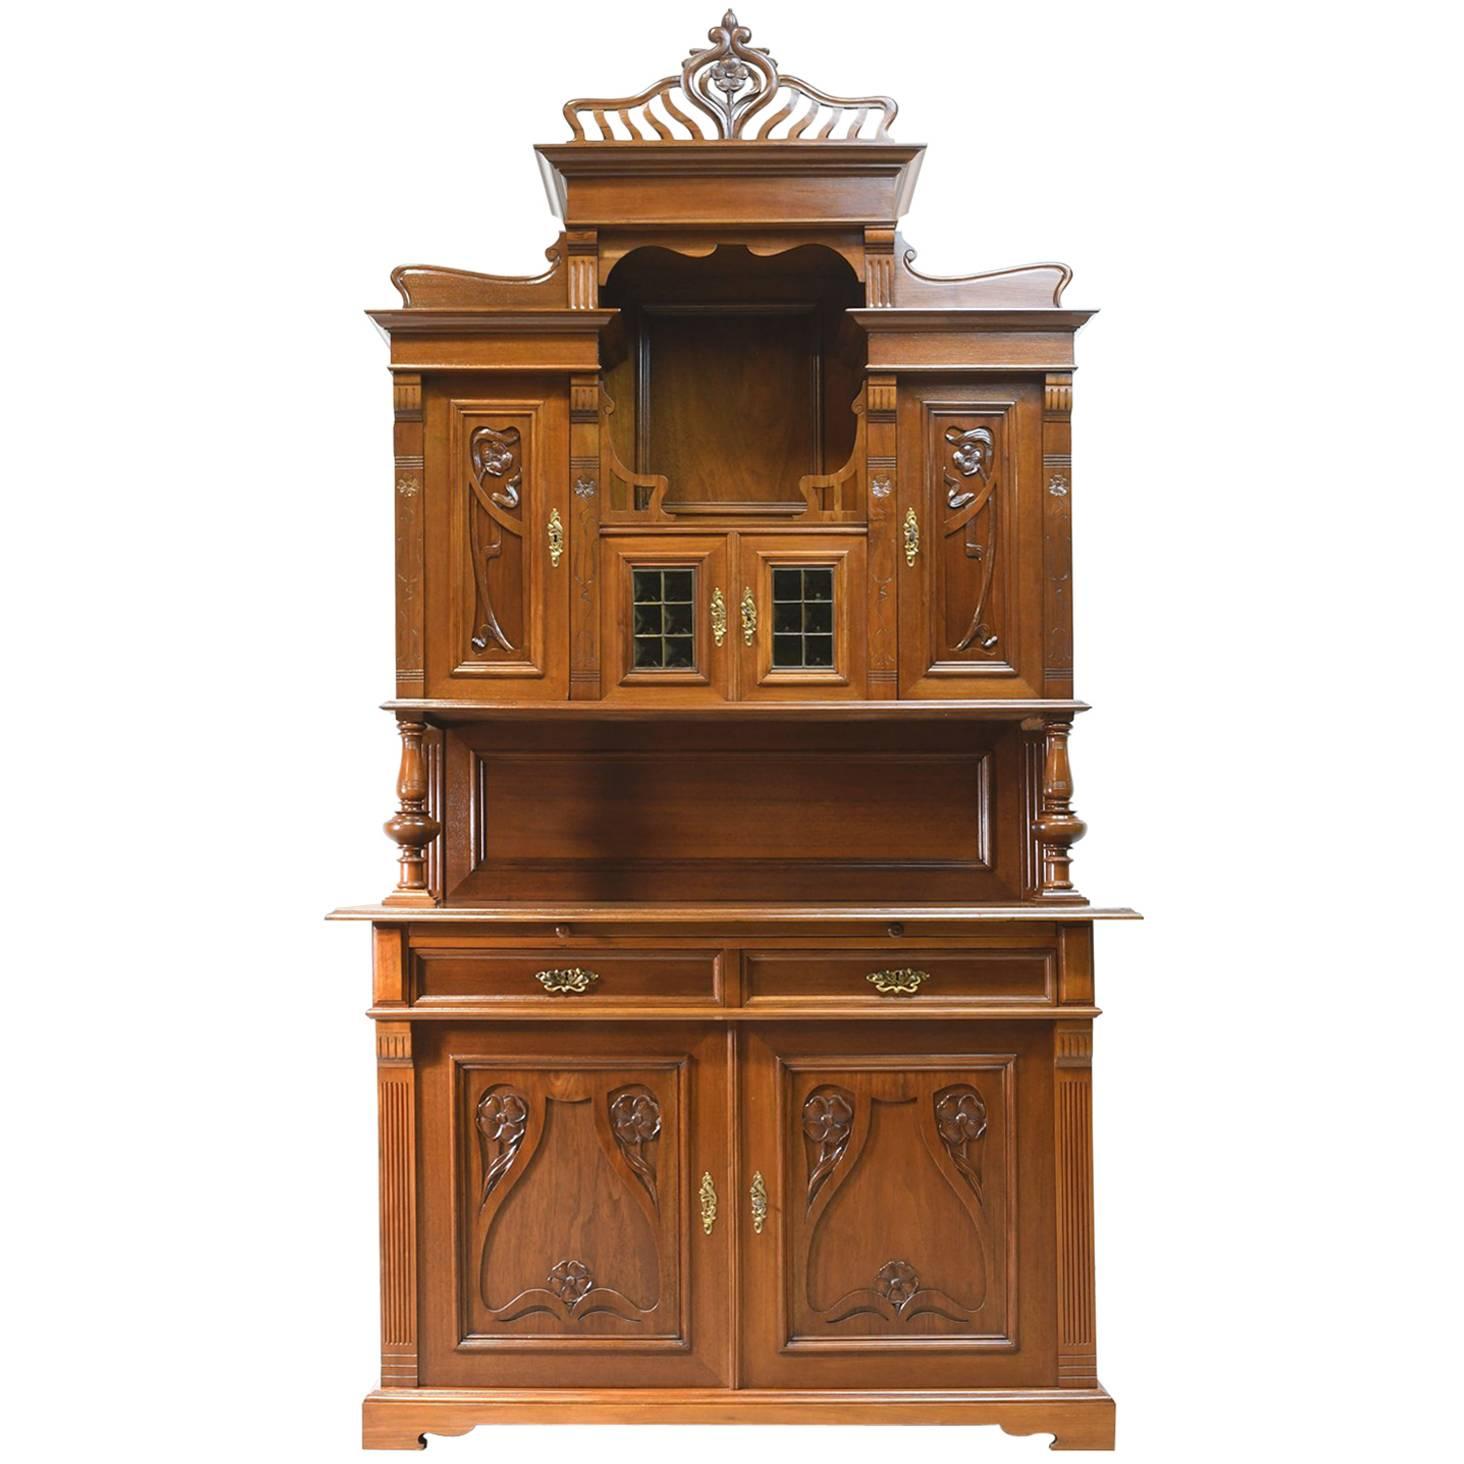 Early 20th Century Art Nouveau Buffet Cupboard or Bar Cabinet in French Walnut For Sale